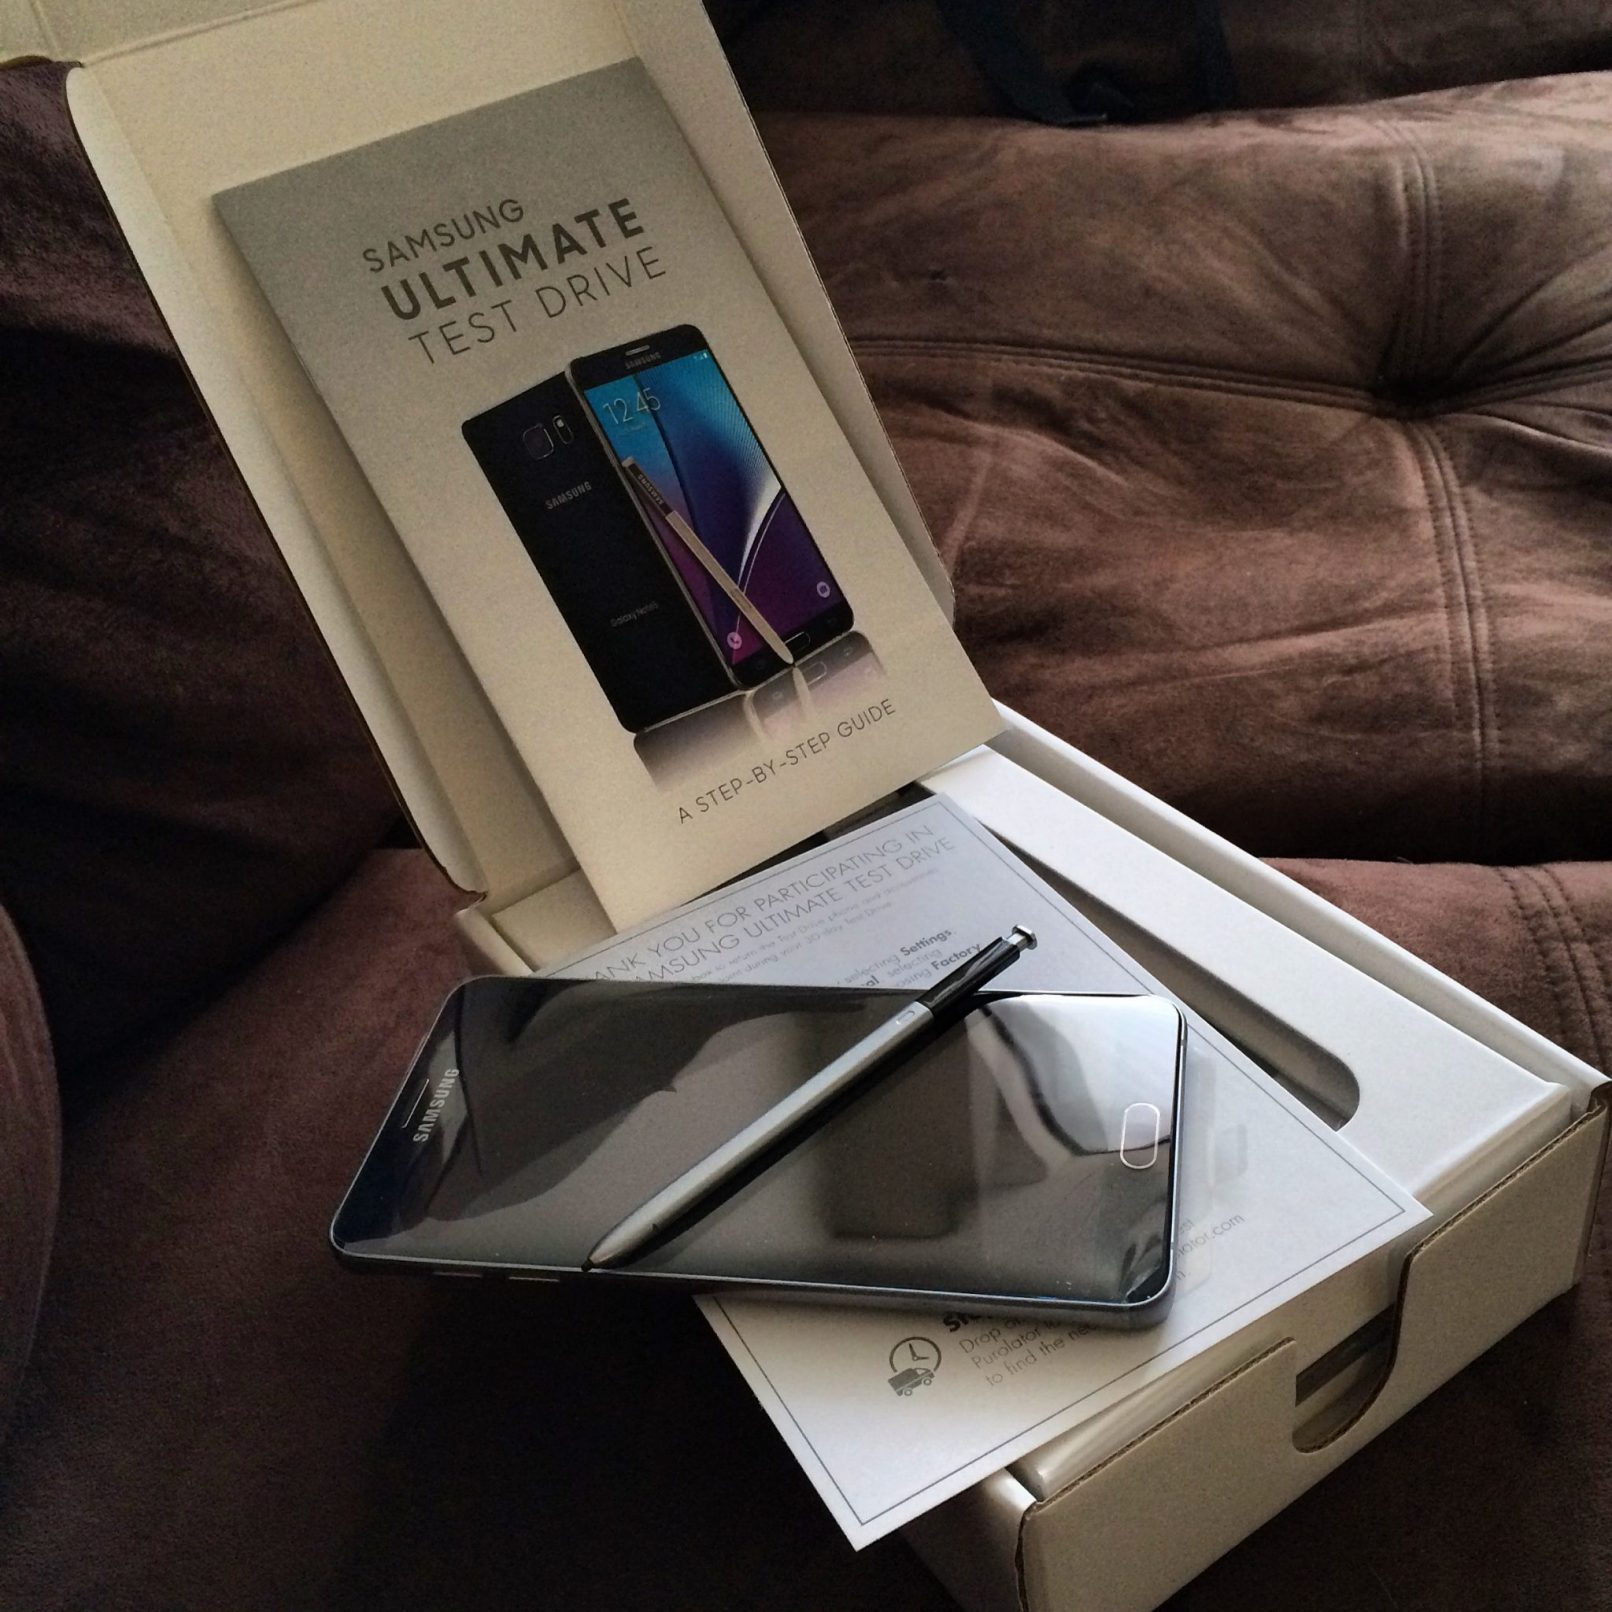 Brand new galaxy note 5 in box from promotion in 2016